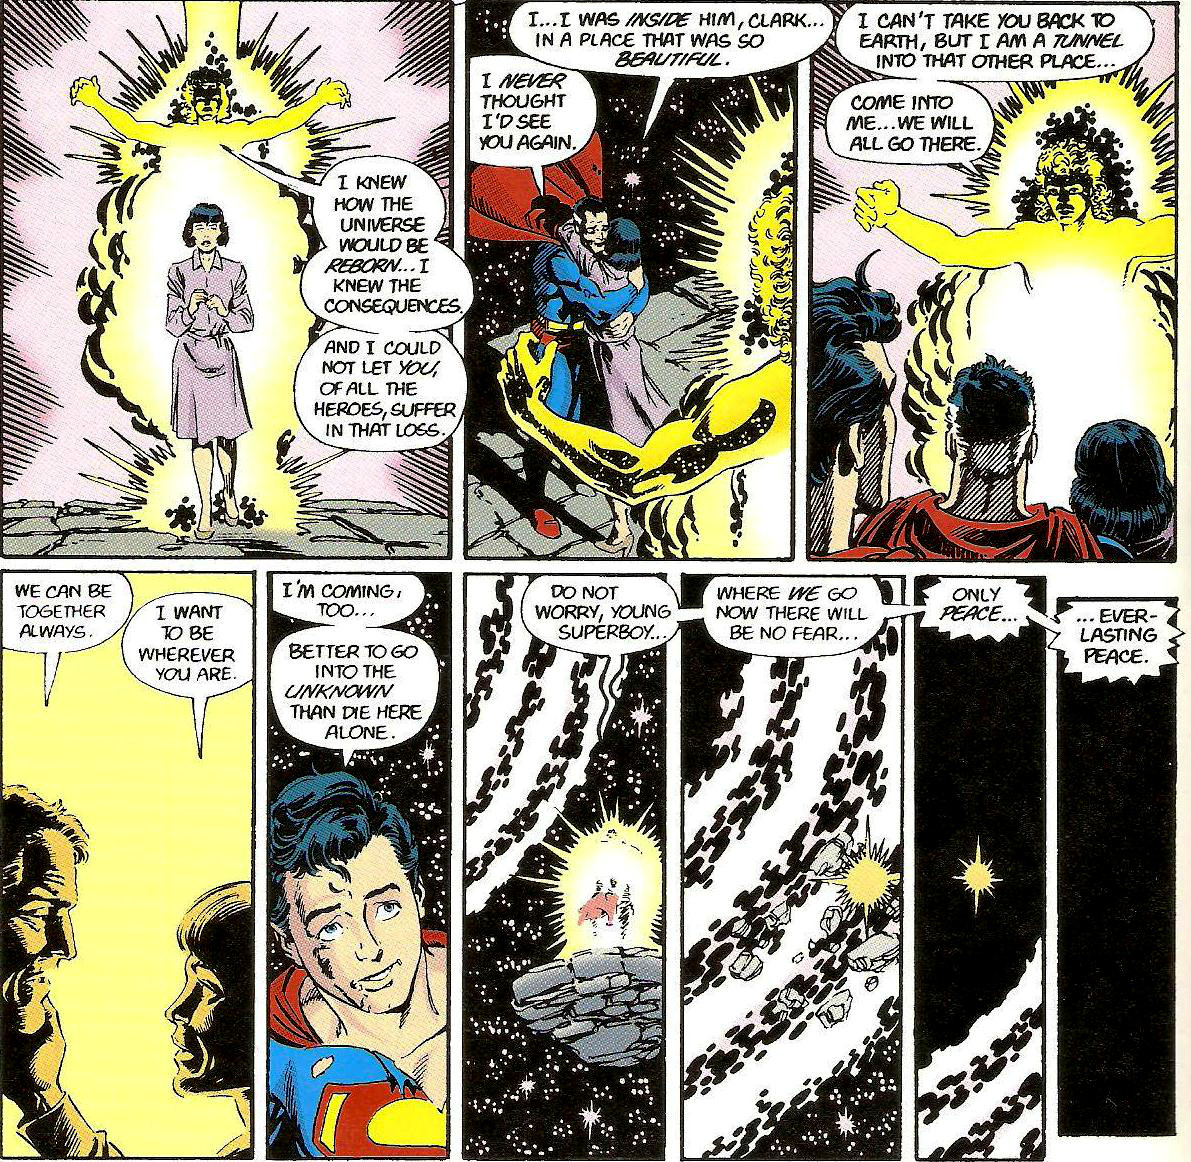 From Crisis on Infinite Earths #12 (1986)